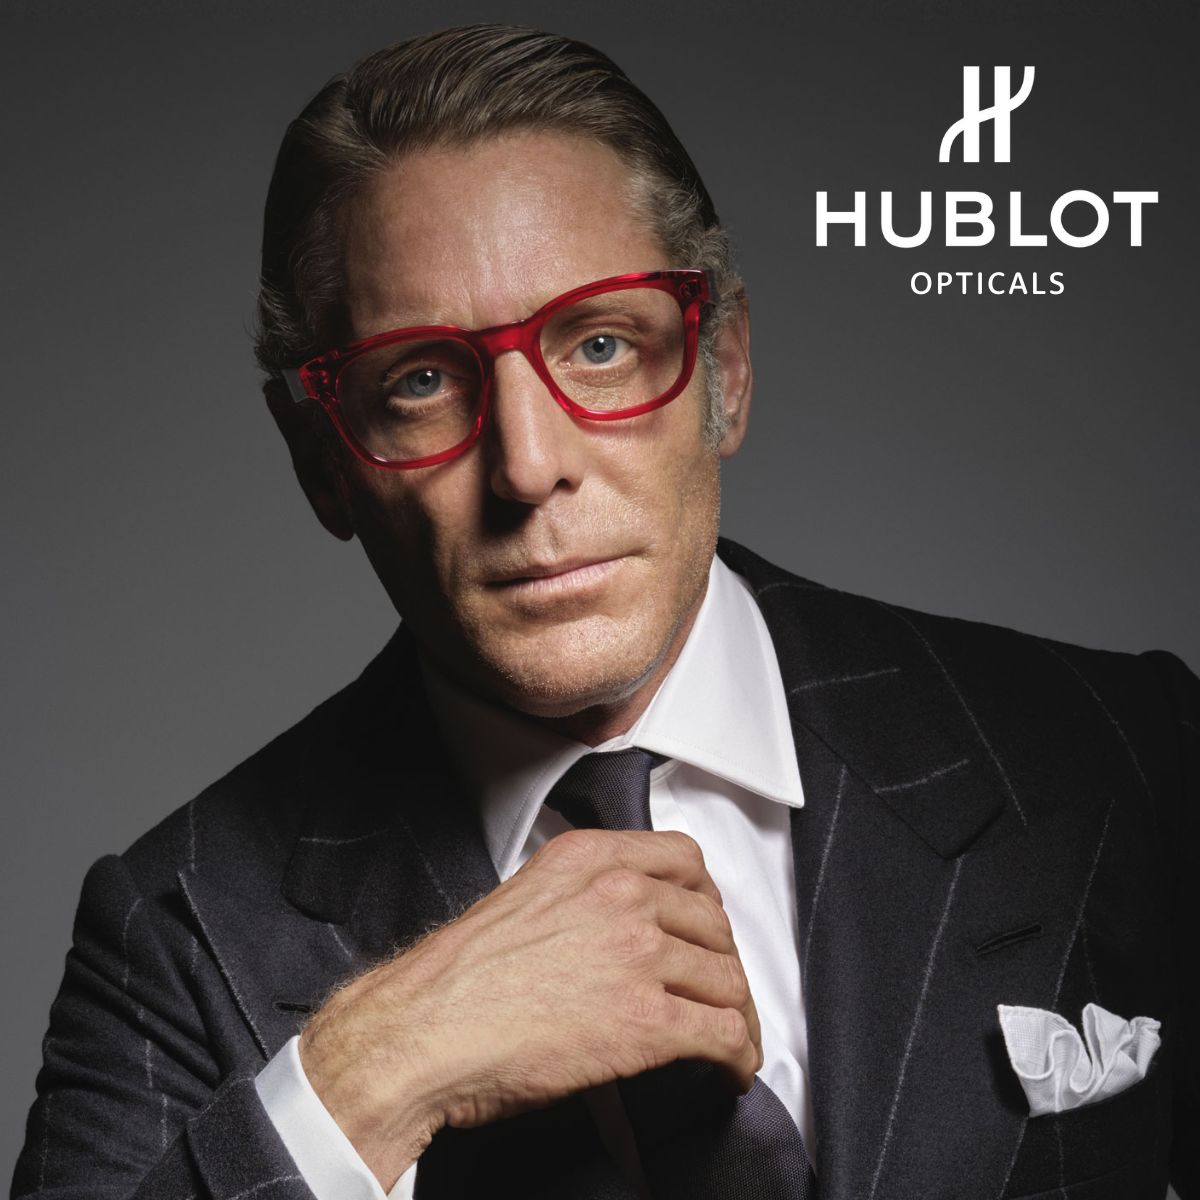 "Elevate your look with trendy Hublot eyeglasses and optical frames from Optorium, offering affordable luxury for men and women."